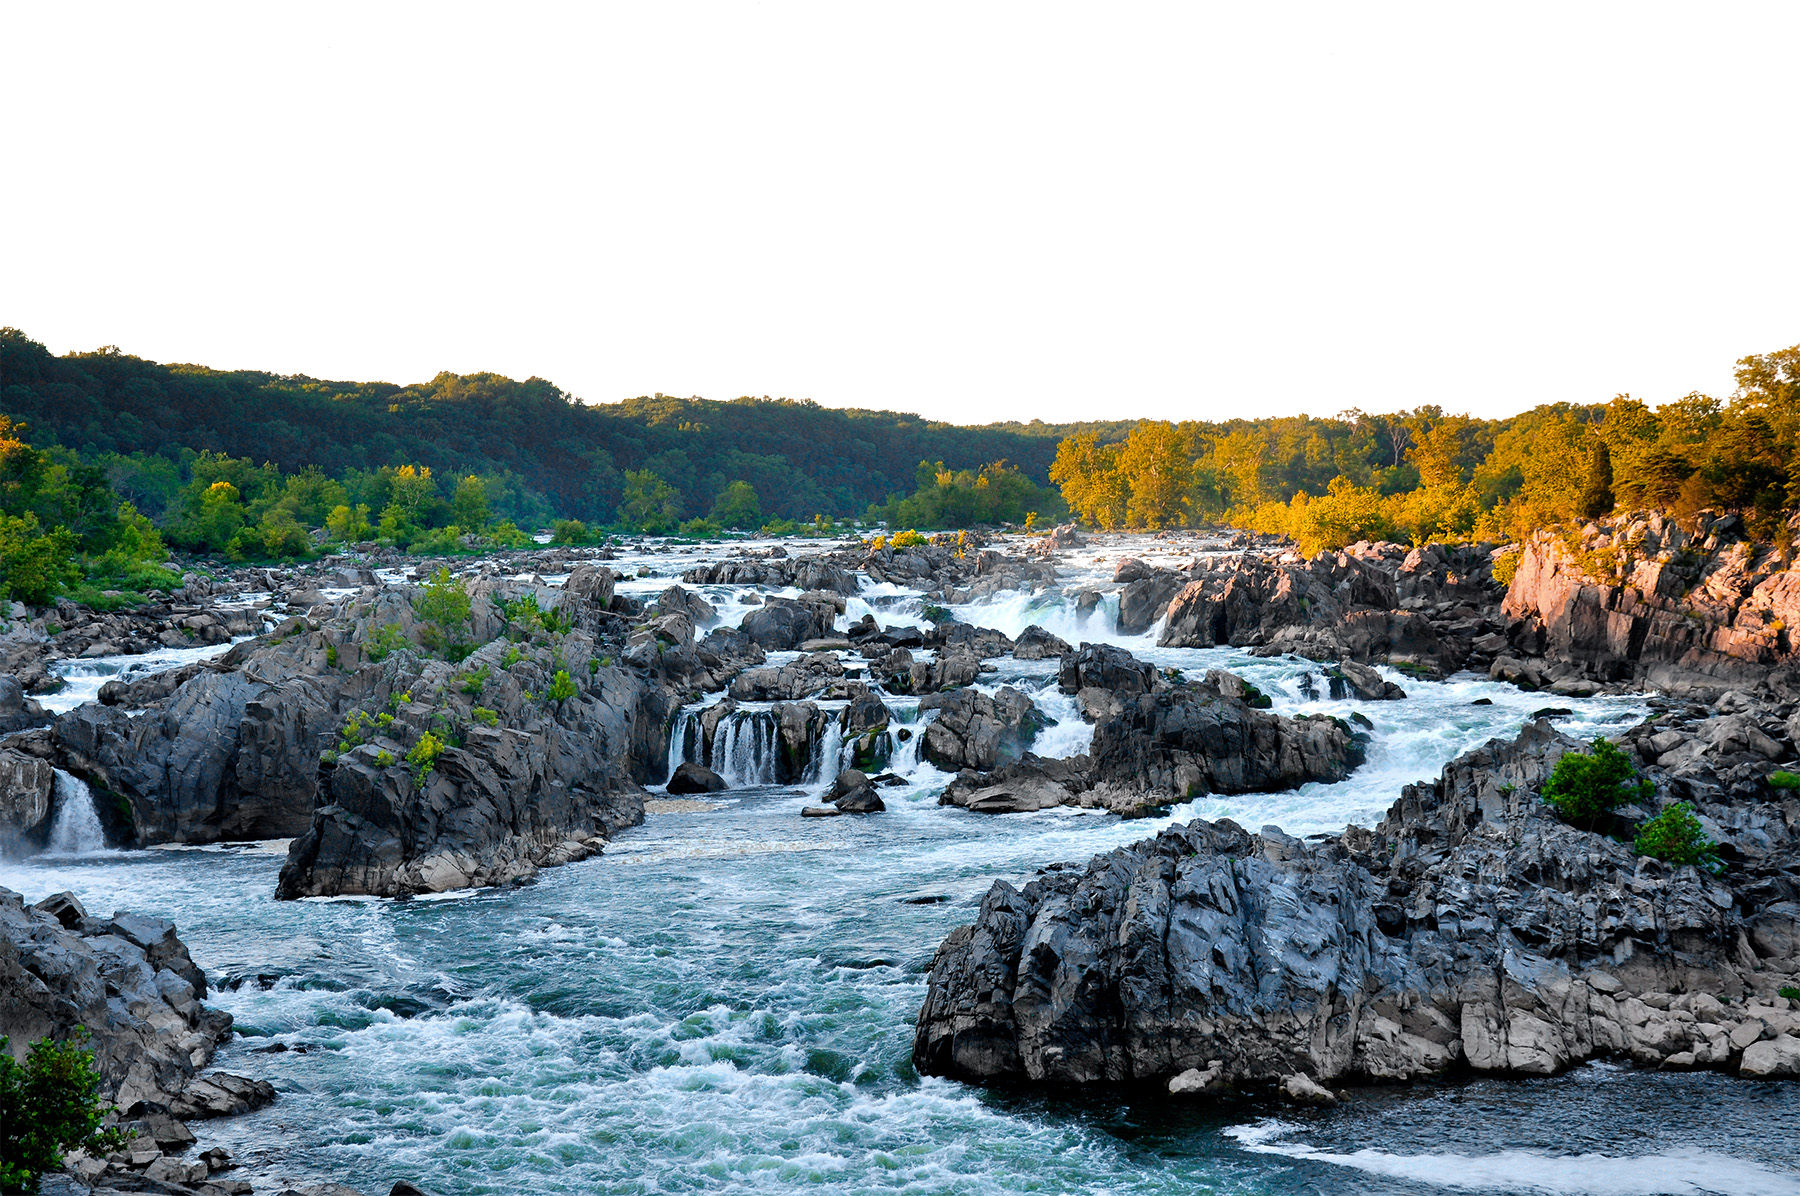 A photograph of Great Falls with its rushing water and rocky formations. Trees can be seen in the background. 